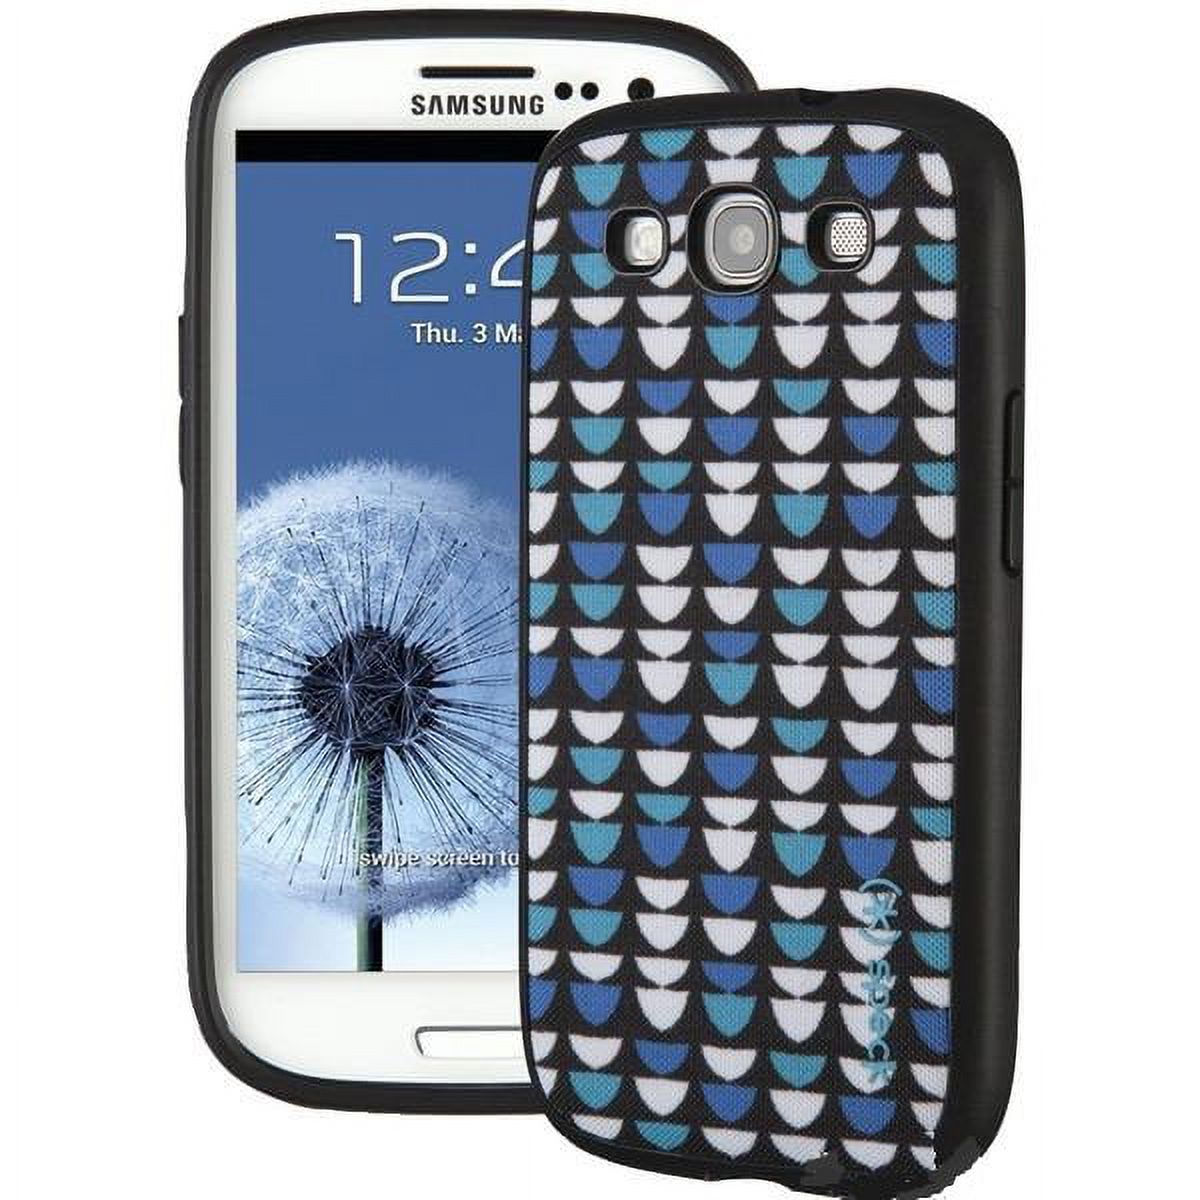 Speck FabShell for Samsung Galaxy S III - image 2 of 3